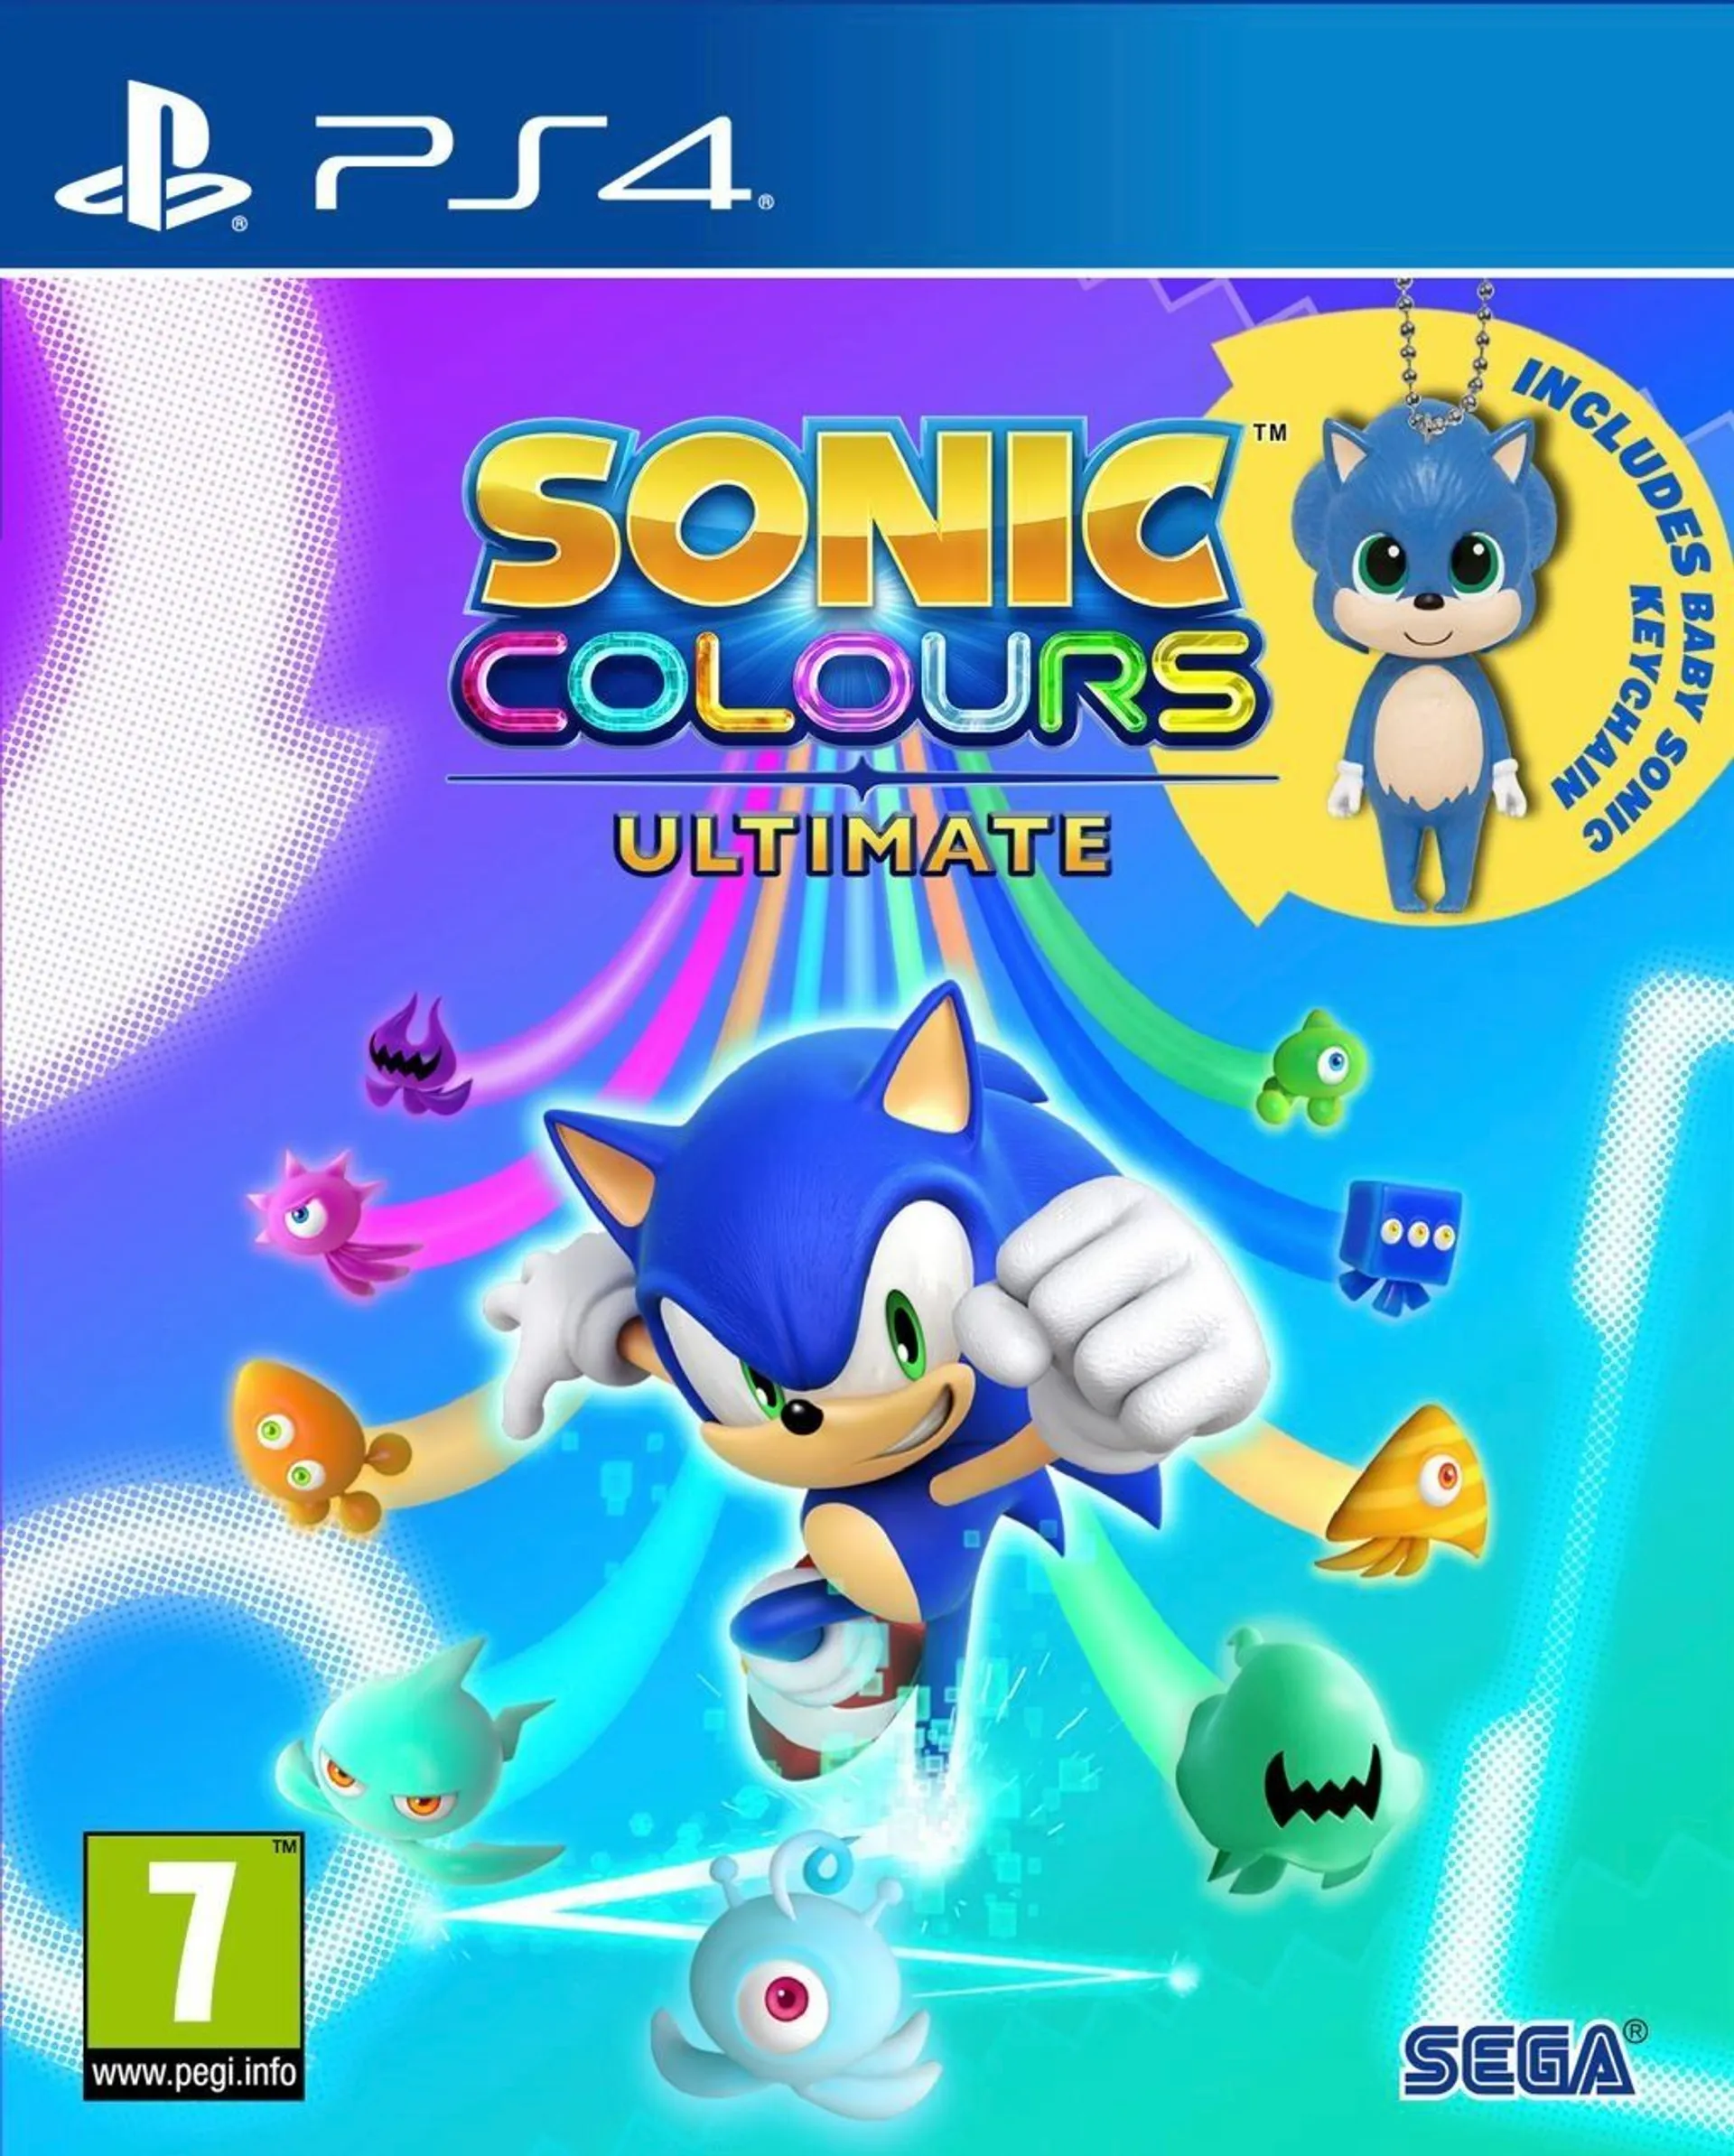 PlayStation 4 Sonic Colours Ultimate